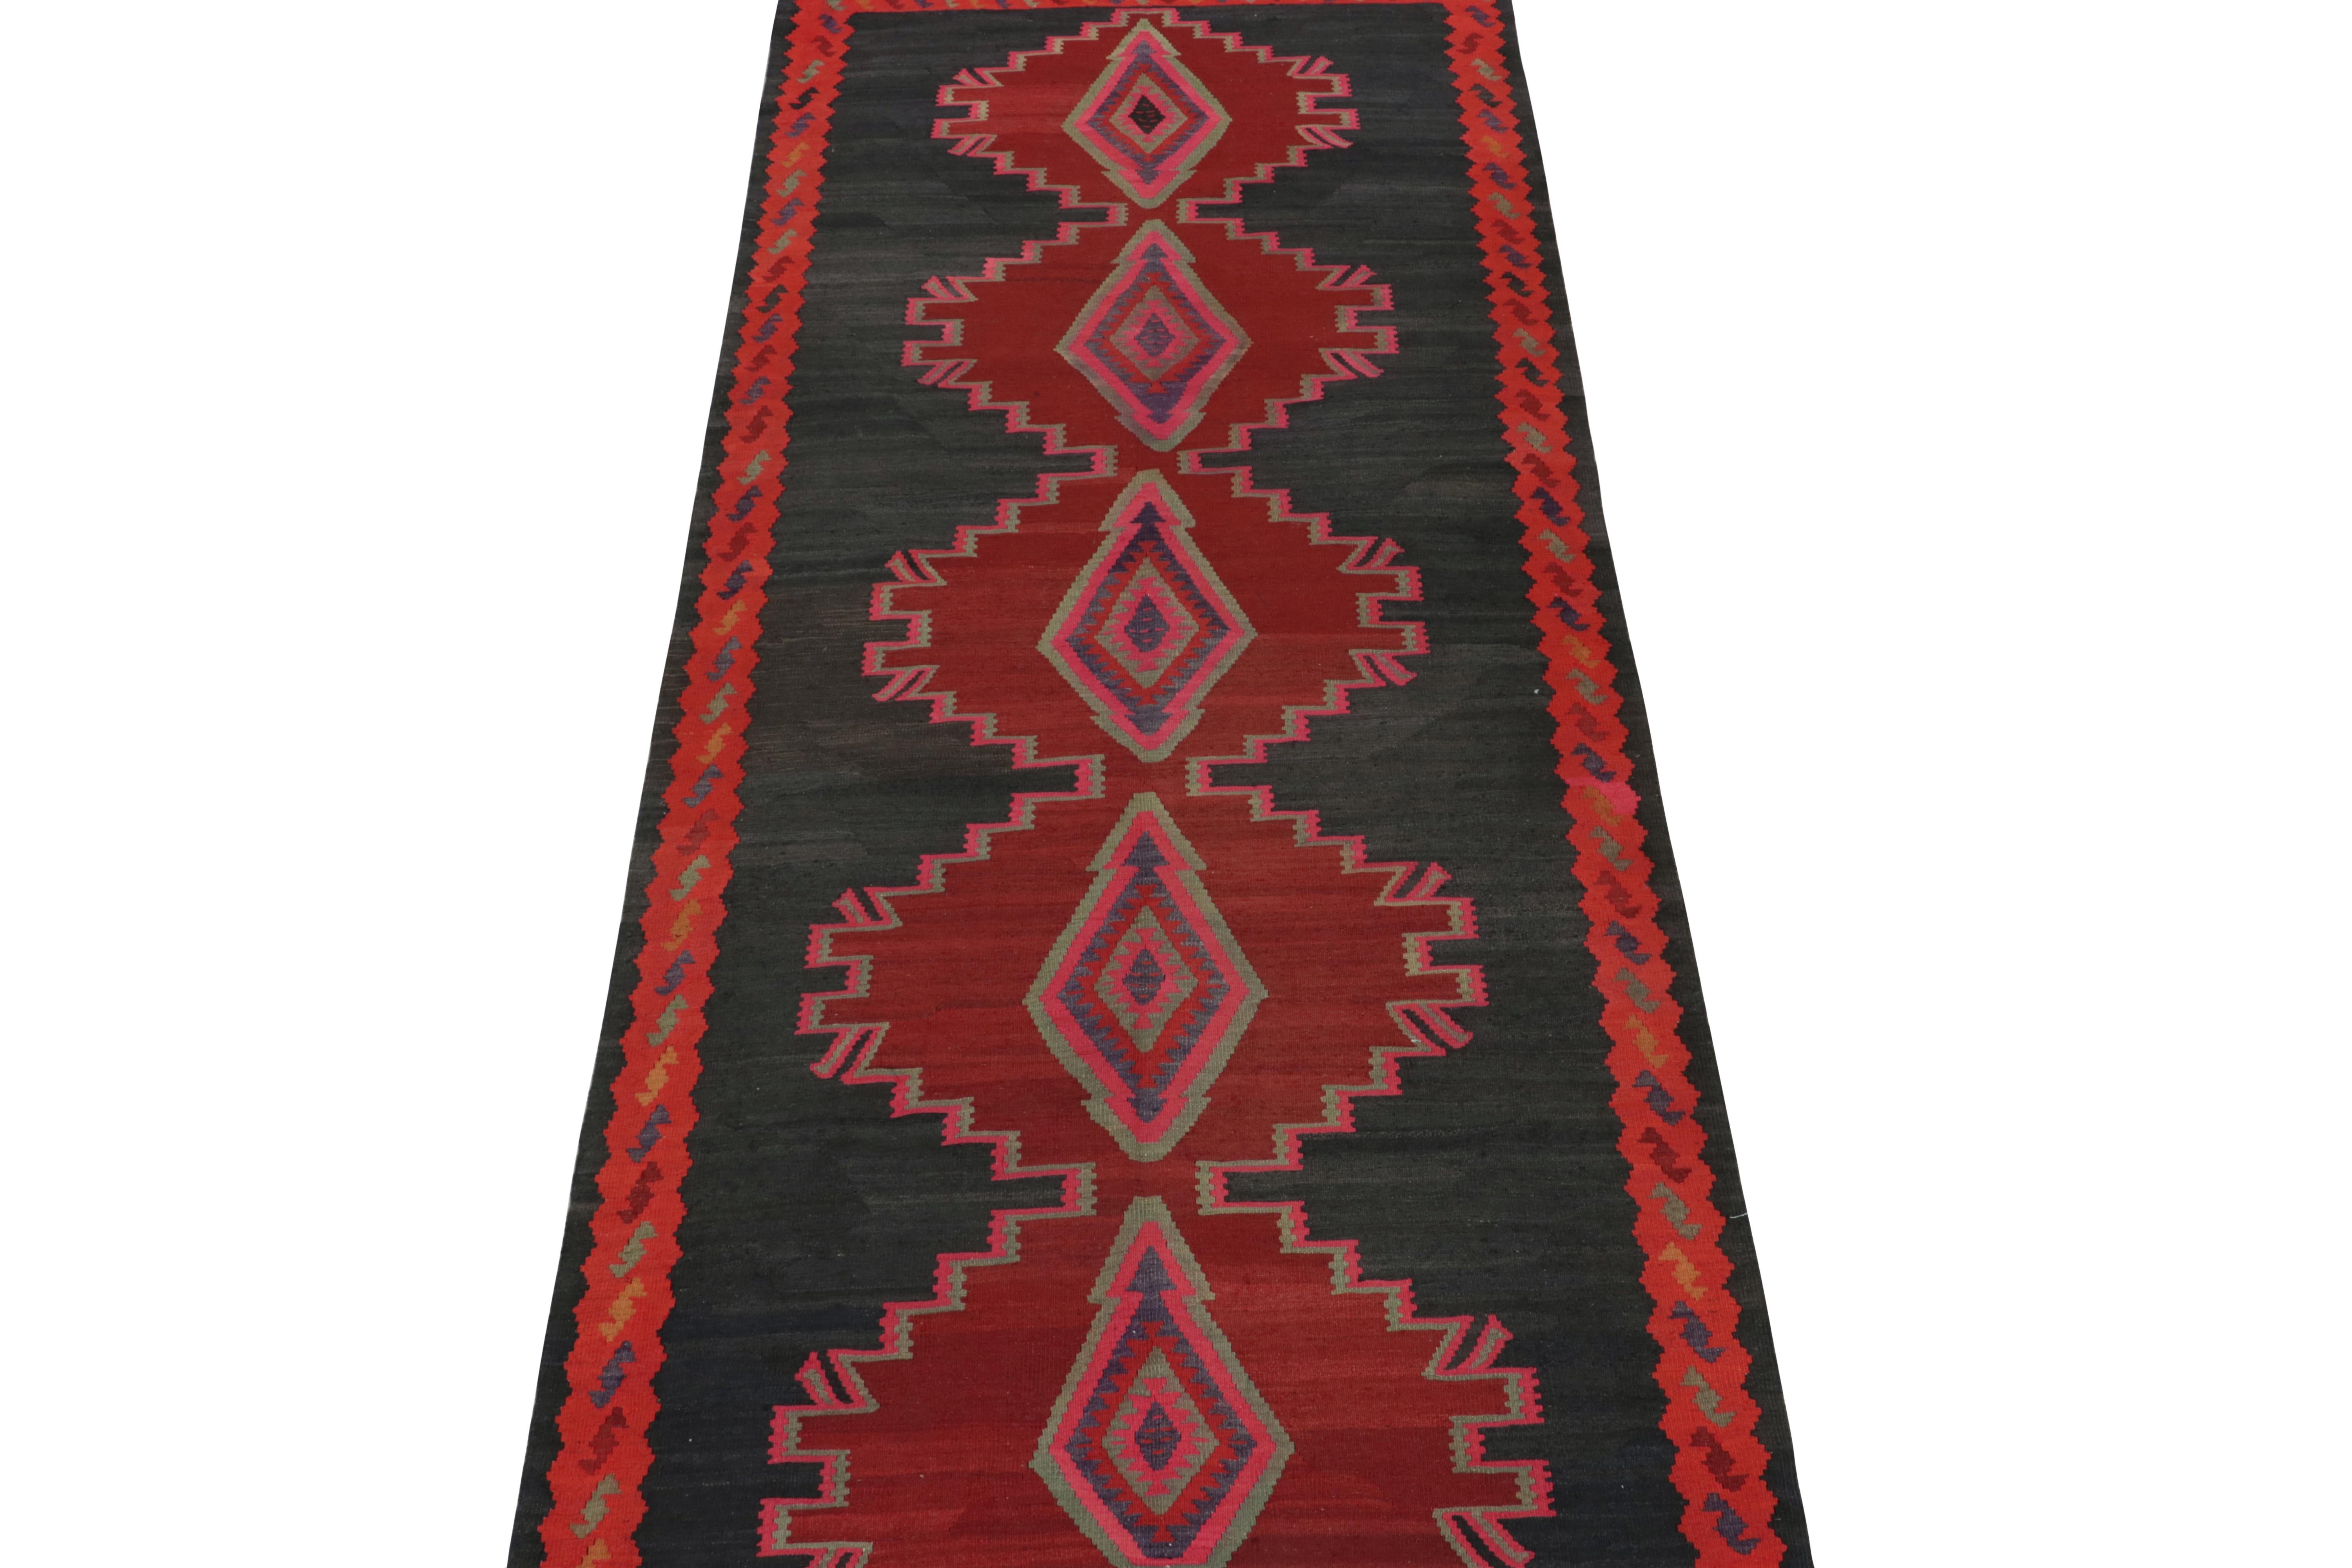 This vintage 5x13 Persian Kilim is a unique tribal rug for its period - hailing from Northwestern Persian from Azerbaijan. Handwoven in wool, it’s believed to originate in Meshkin circa 1950-1960.

Further on the Design:

The charcoal black open